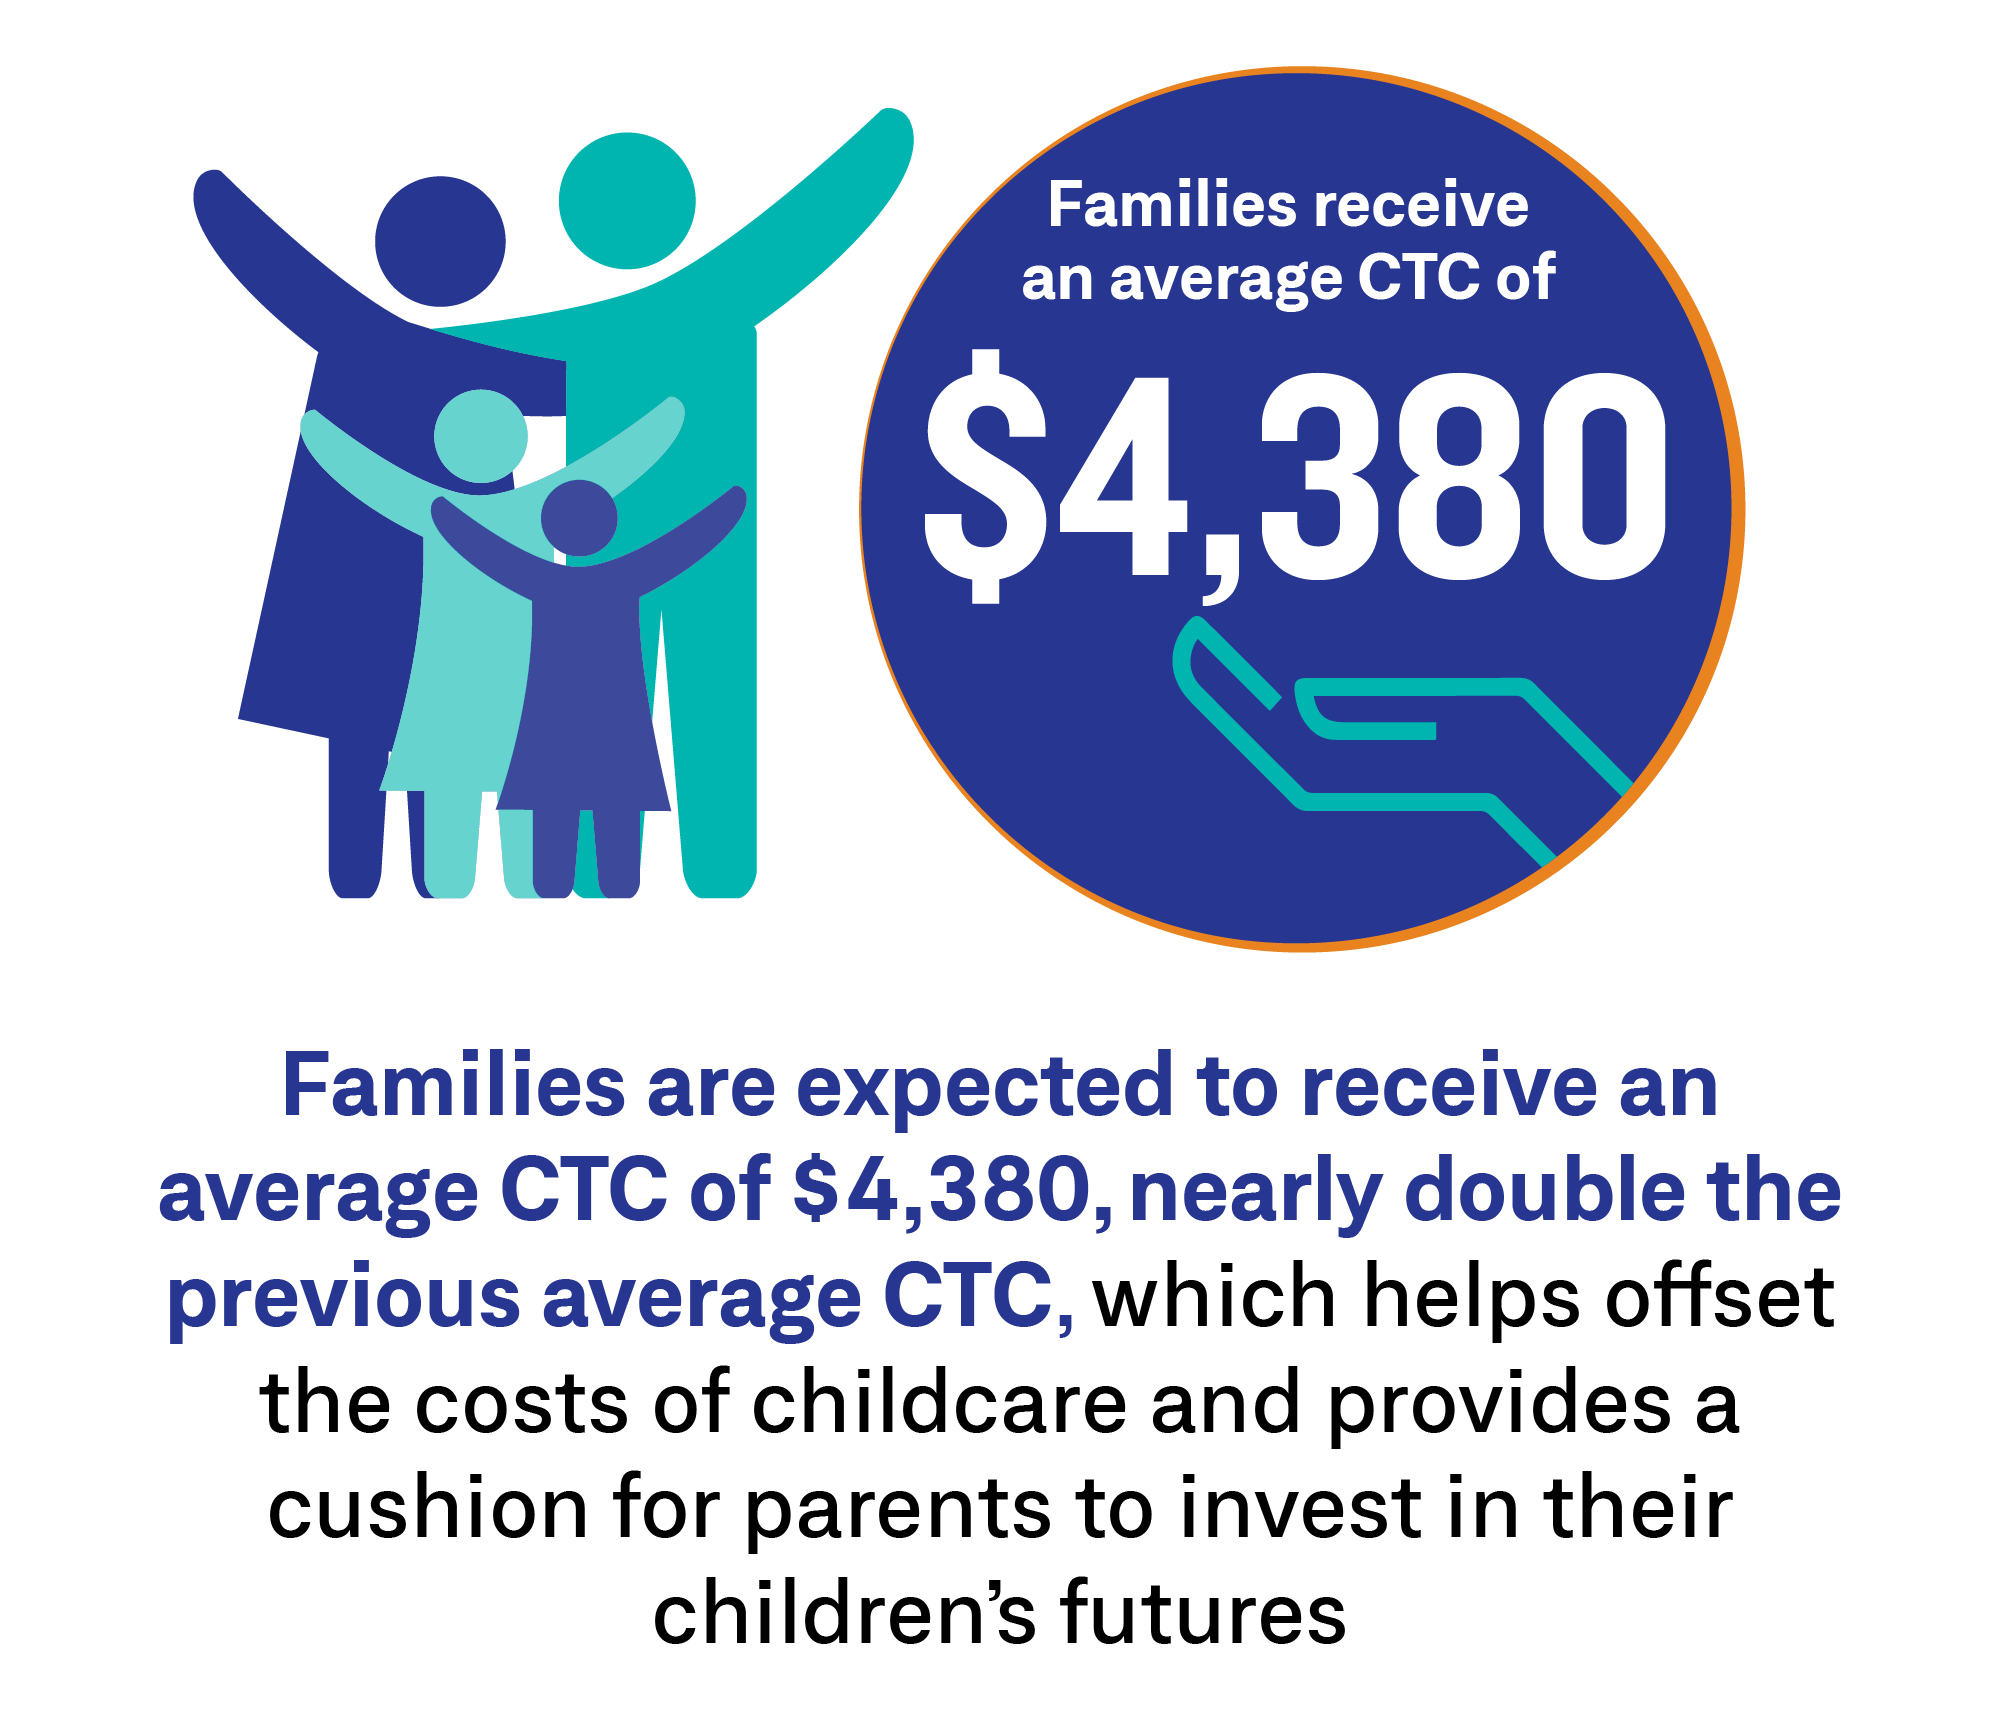 Families receive double the previous average CTC